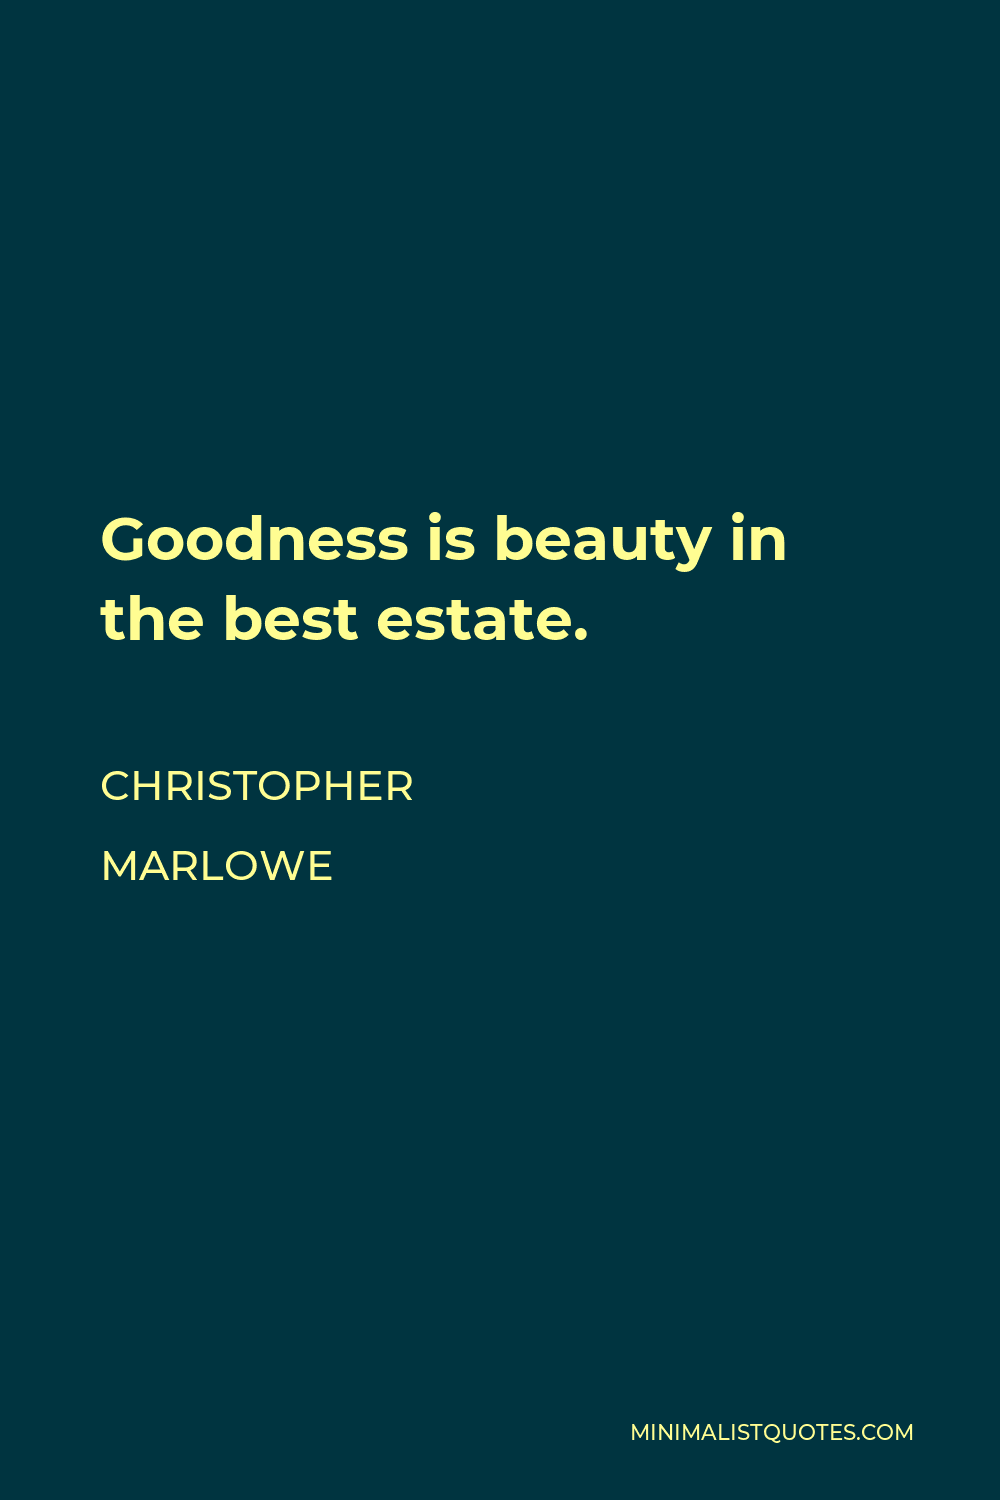 Christopher Marlowe Quote - Goodness is beauty in the best estate.